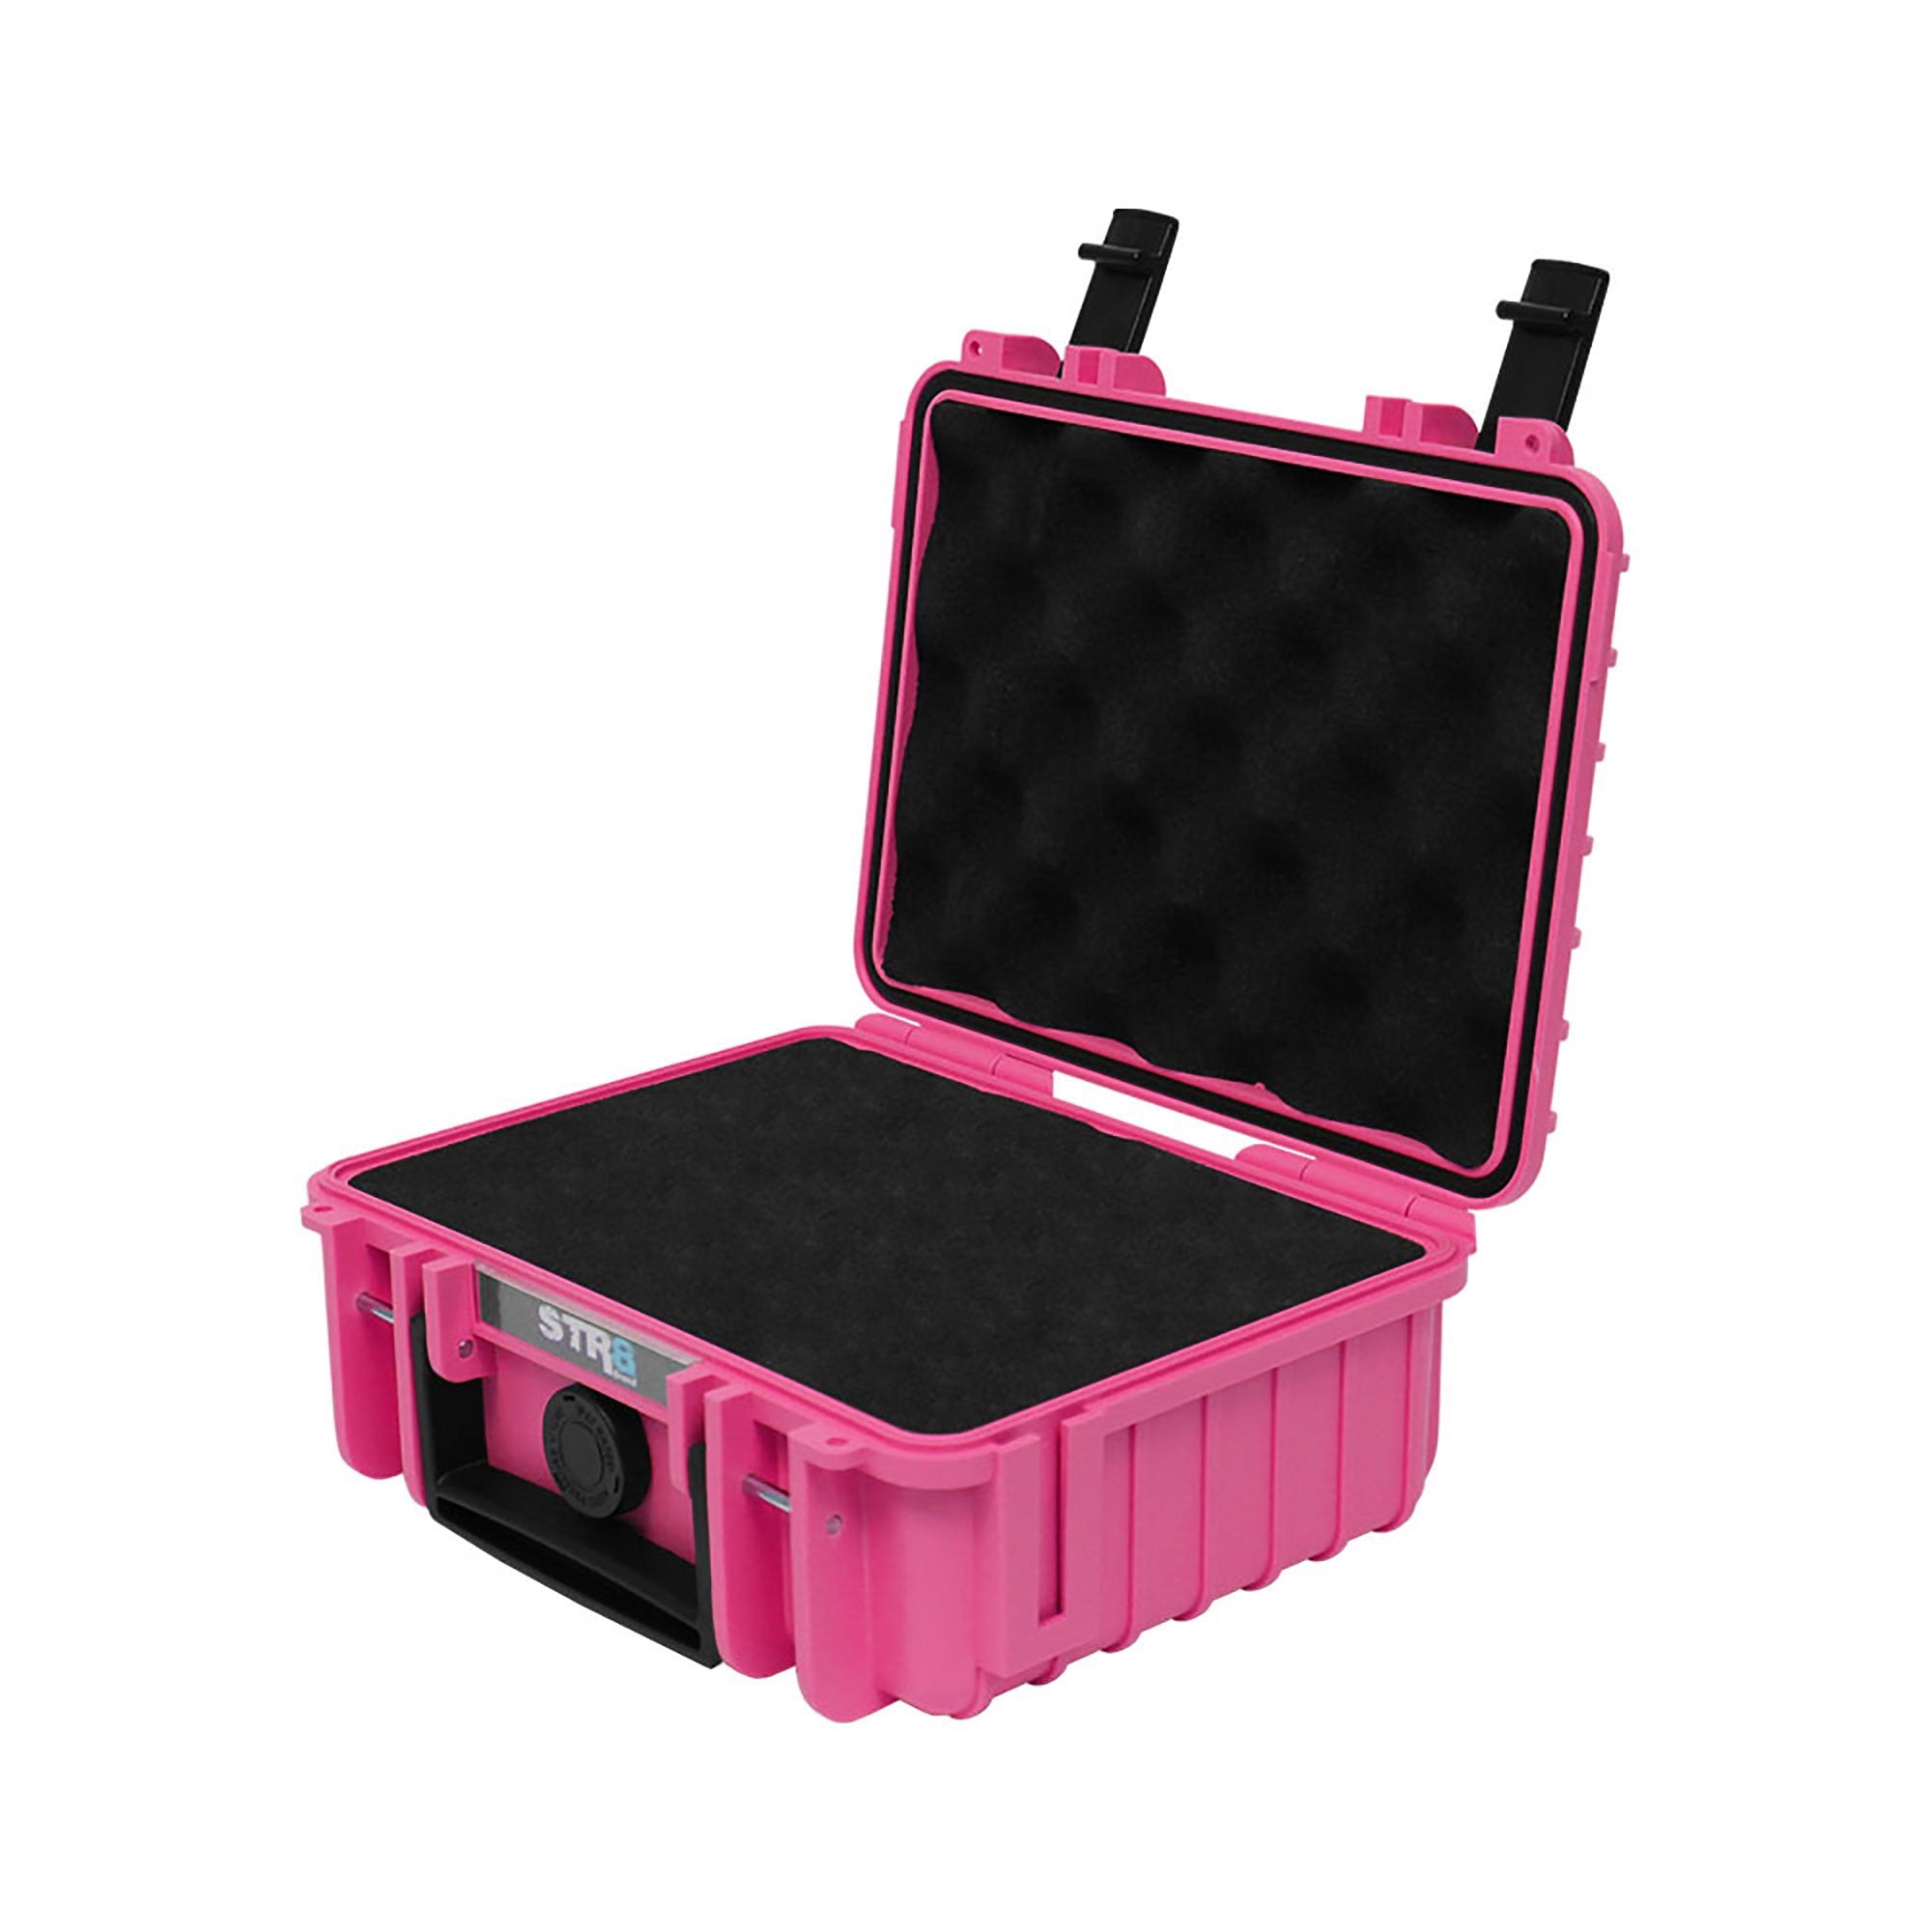 8" 2 Layer Electric Pink STR8 Case - 2